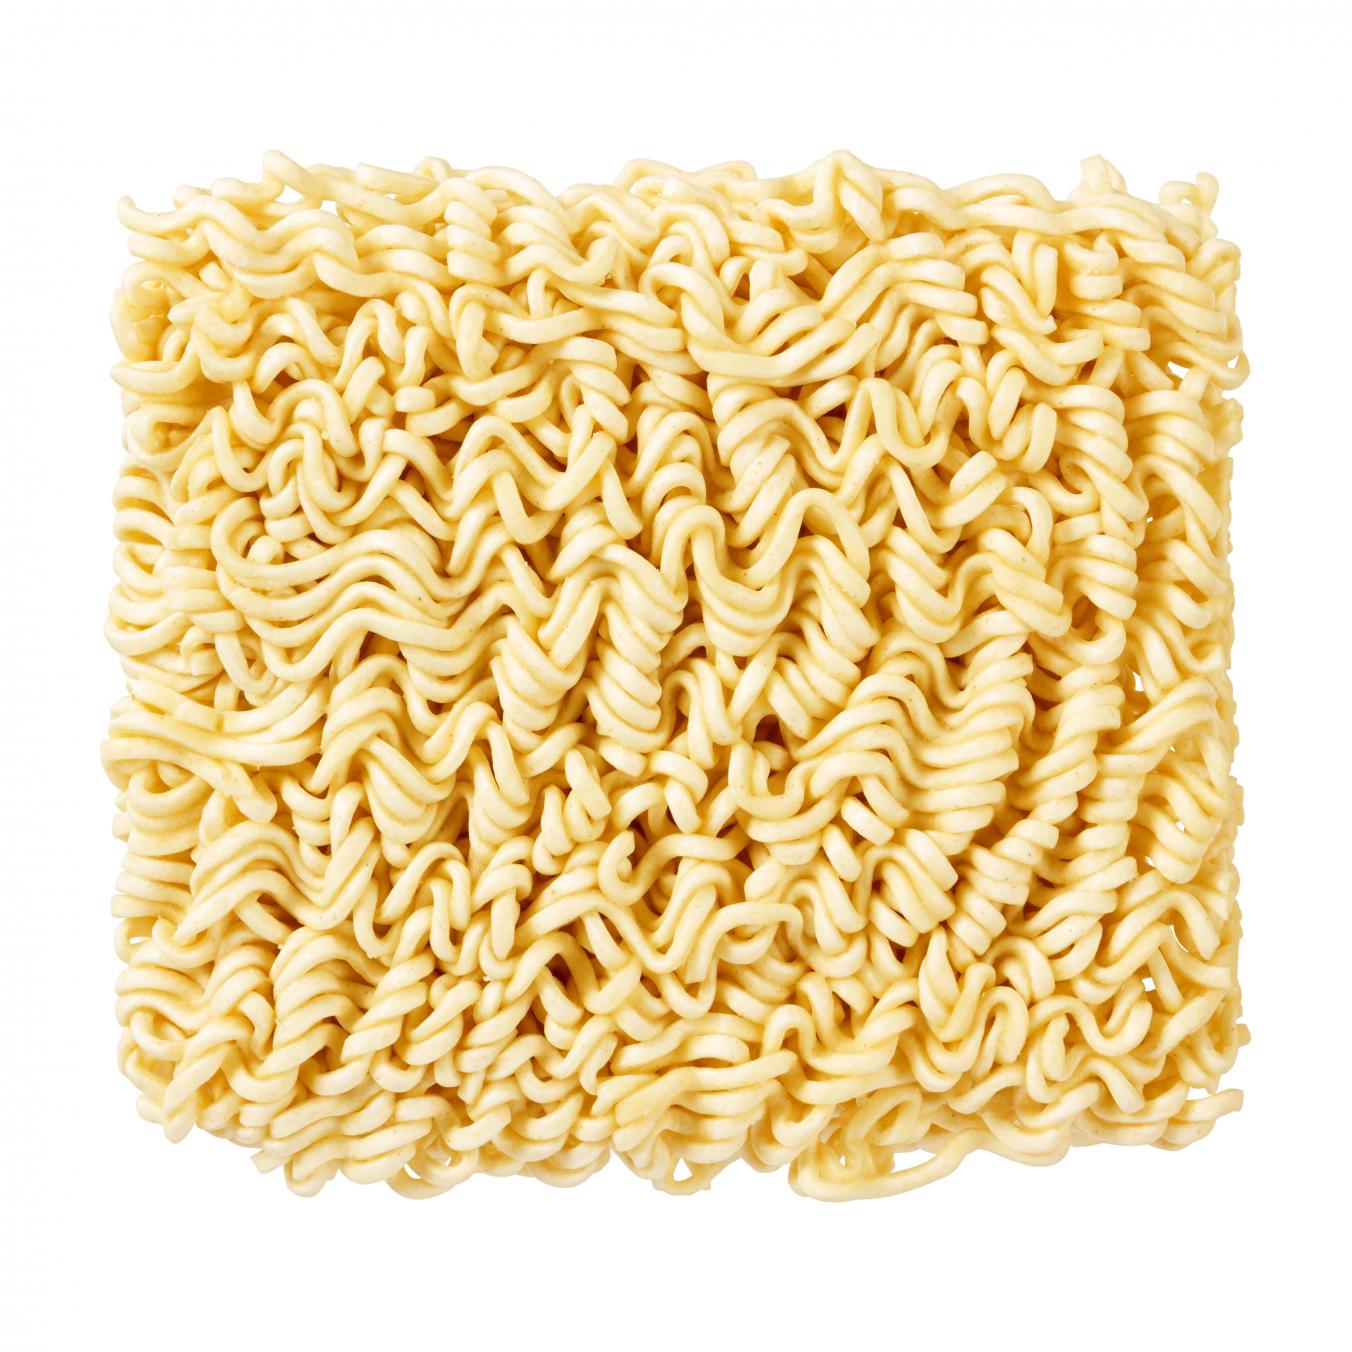 The Invention of Top Ramen